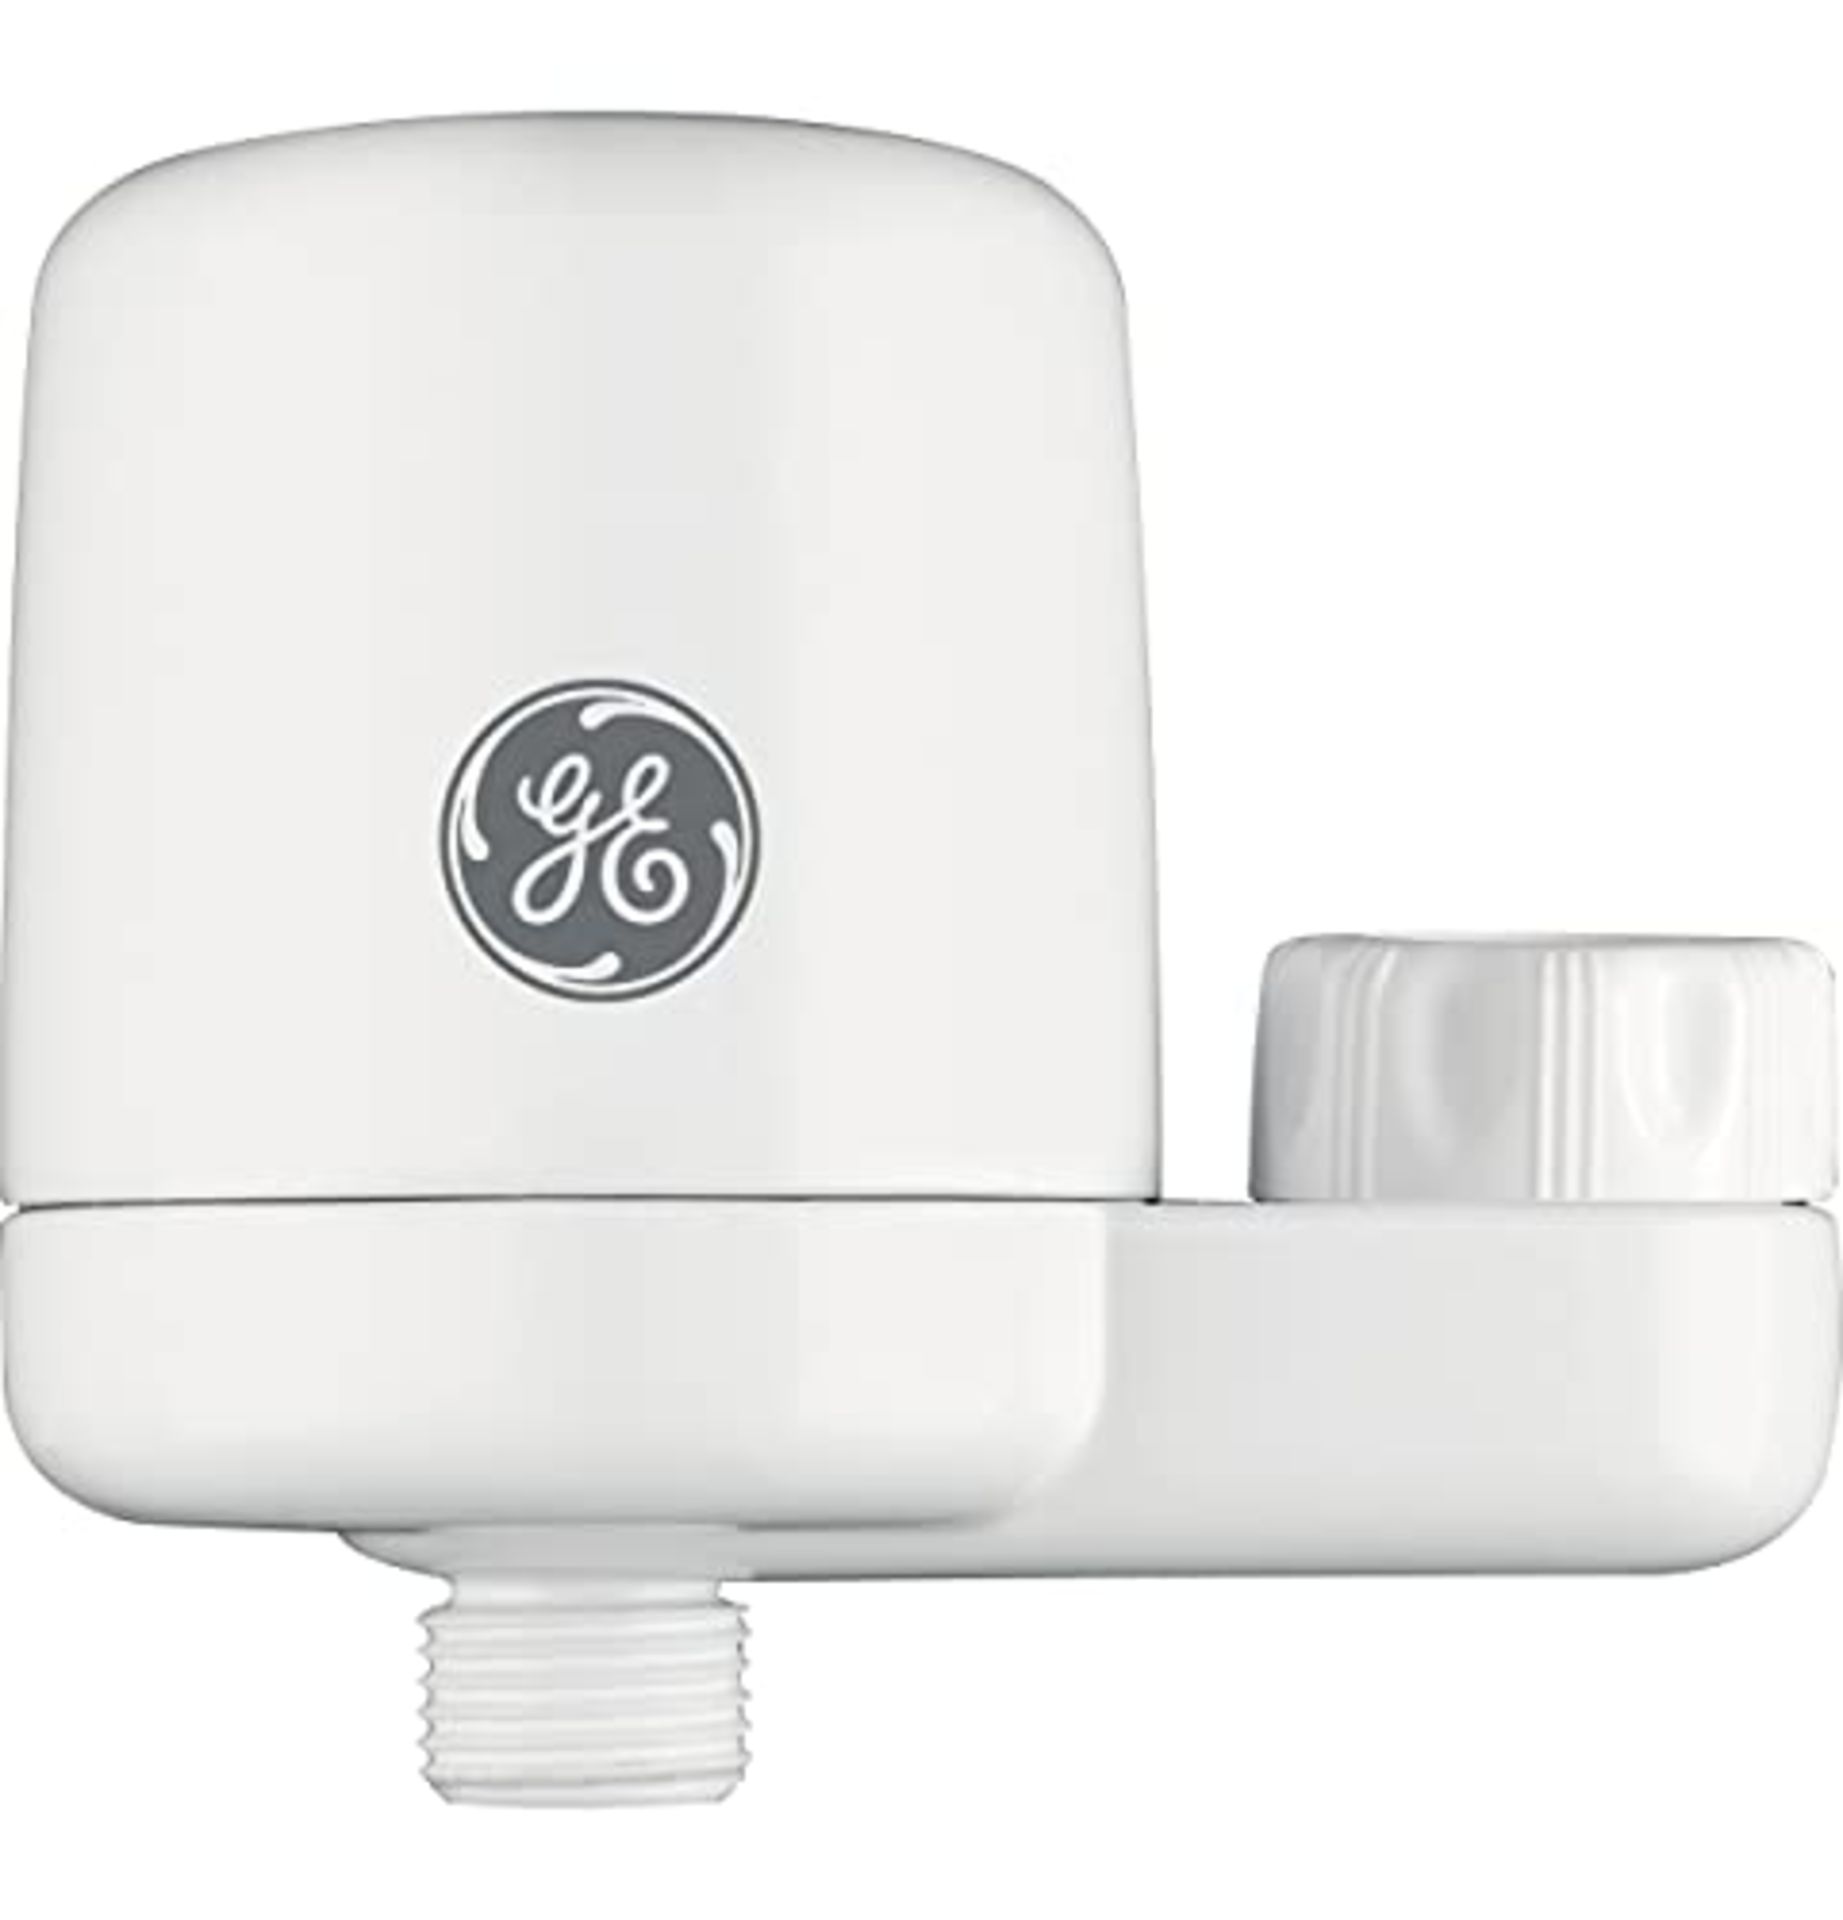 GE Shower Filter System | Connects to Shower Head to Limit Hard Water & Chlorine | Red